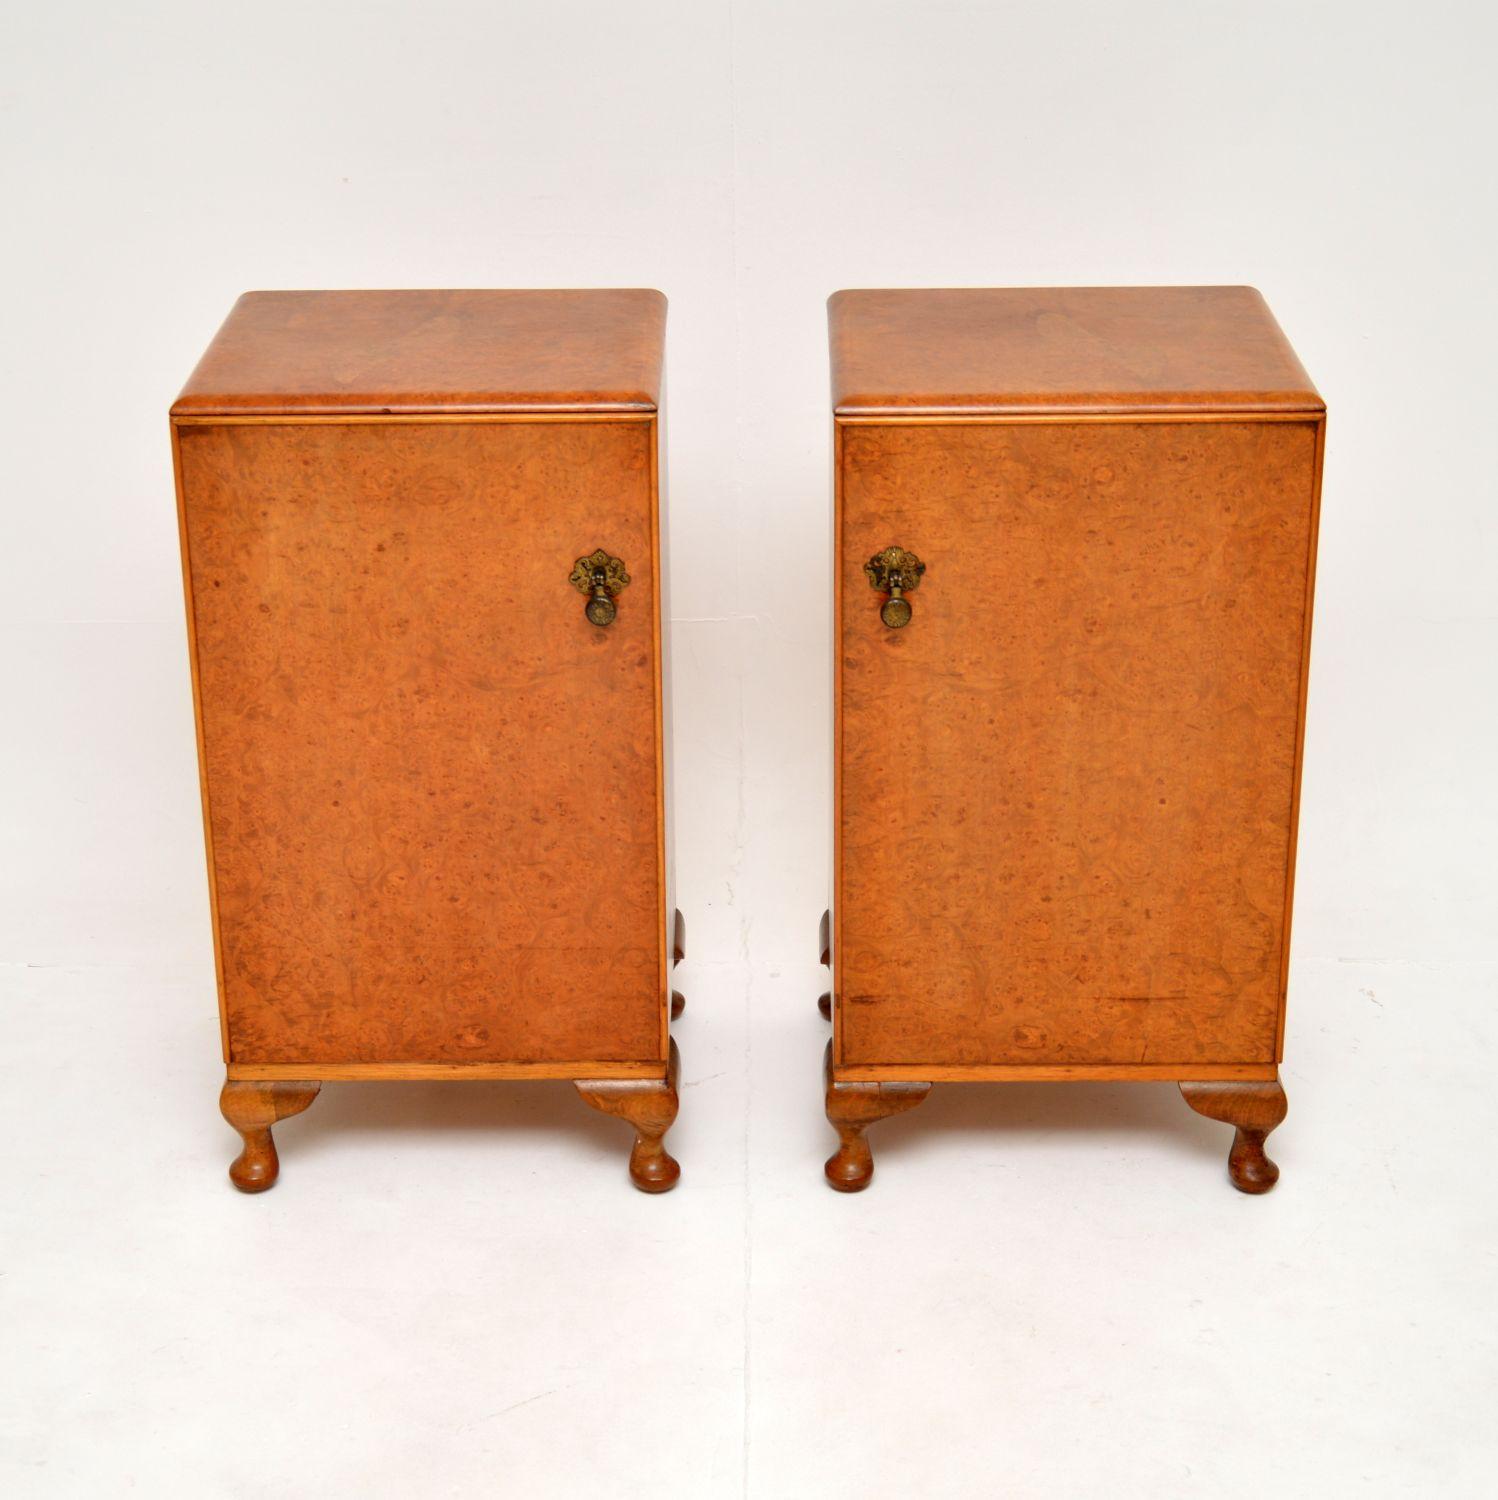 A stunning pair of antique burr walnut bedside cabinets. They were made in England, and date from the 1930’s.

They are beautifully made and are a very useful size. The door fronts and tops have gorgeous burr walnut grain patterns, they sit on